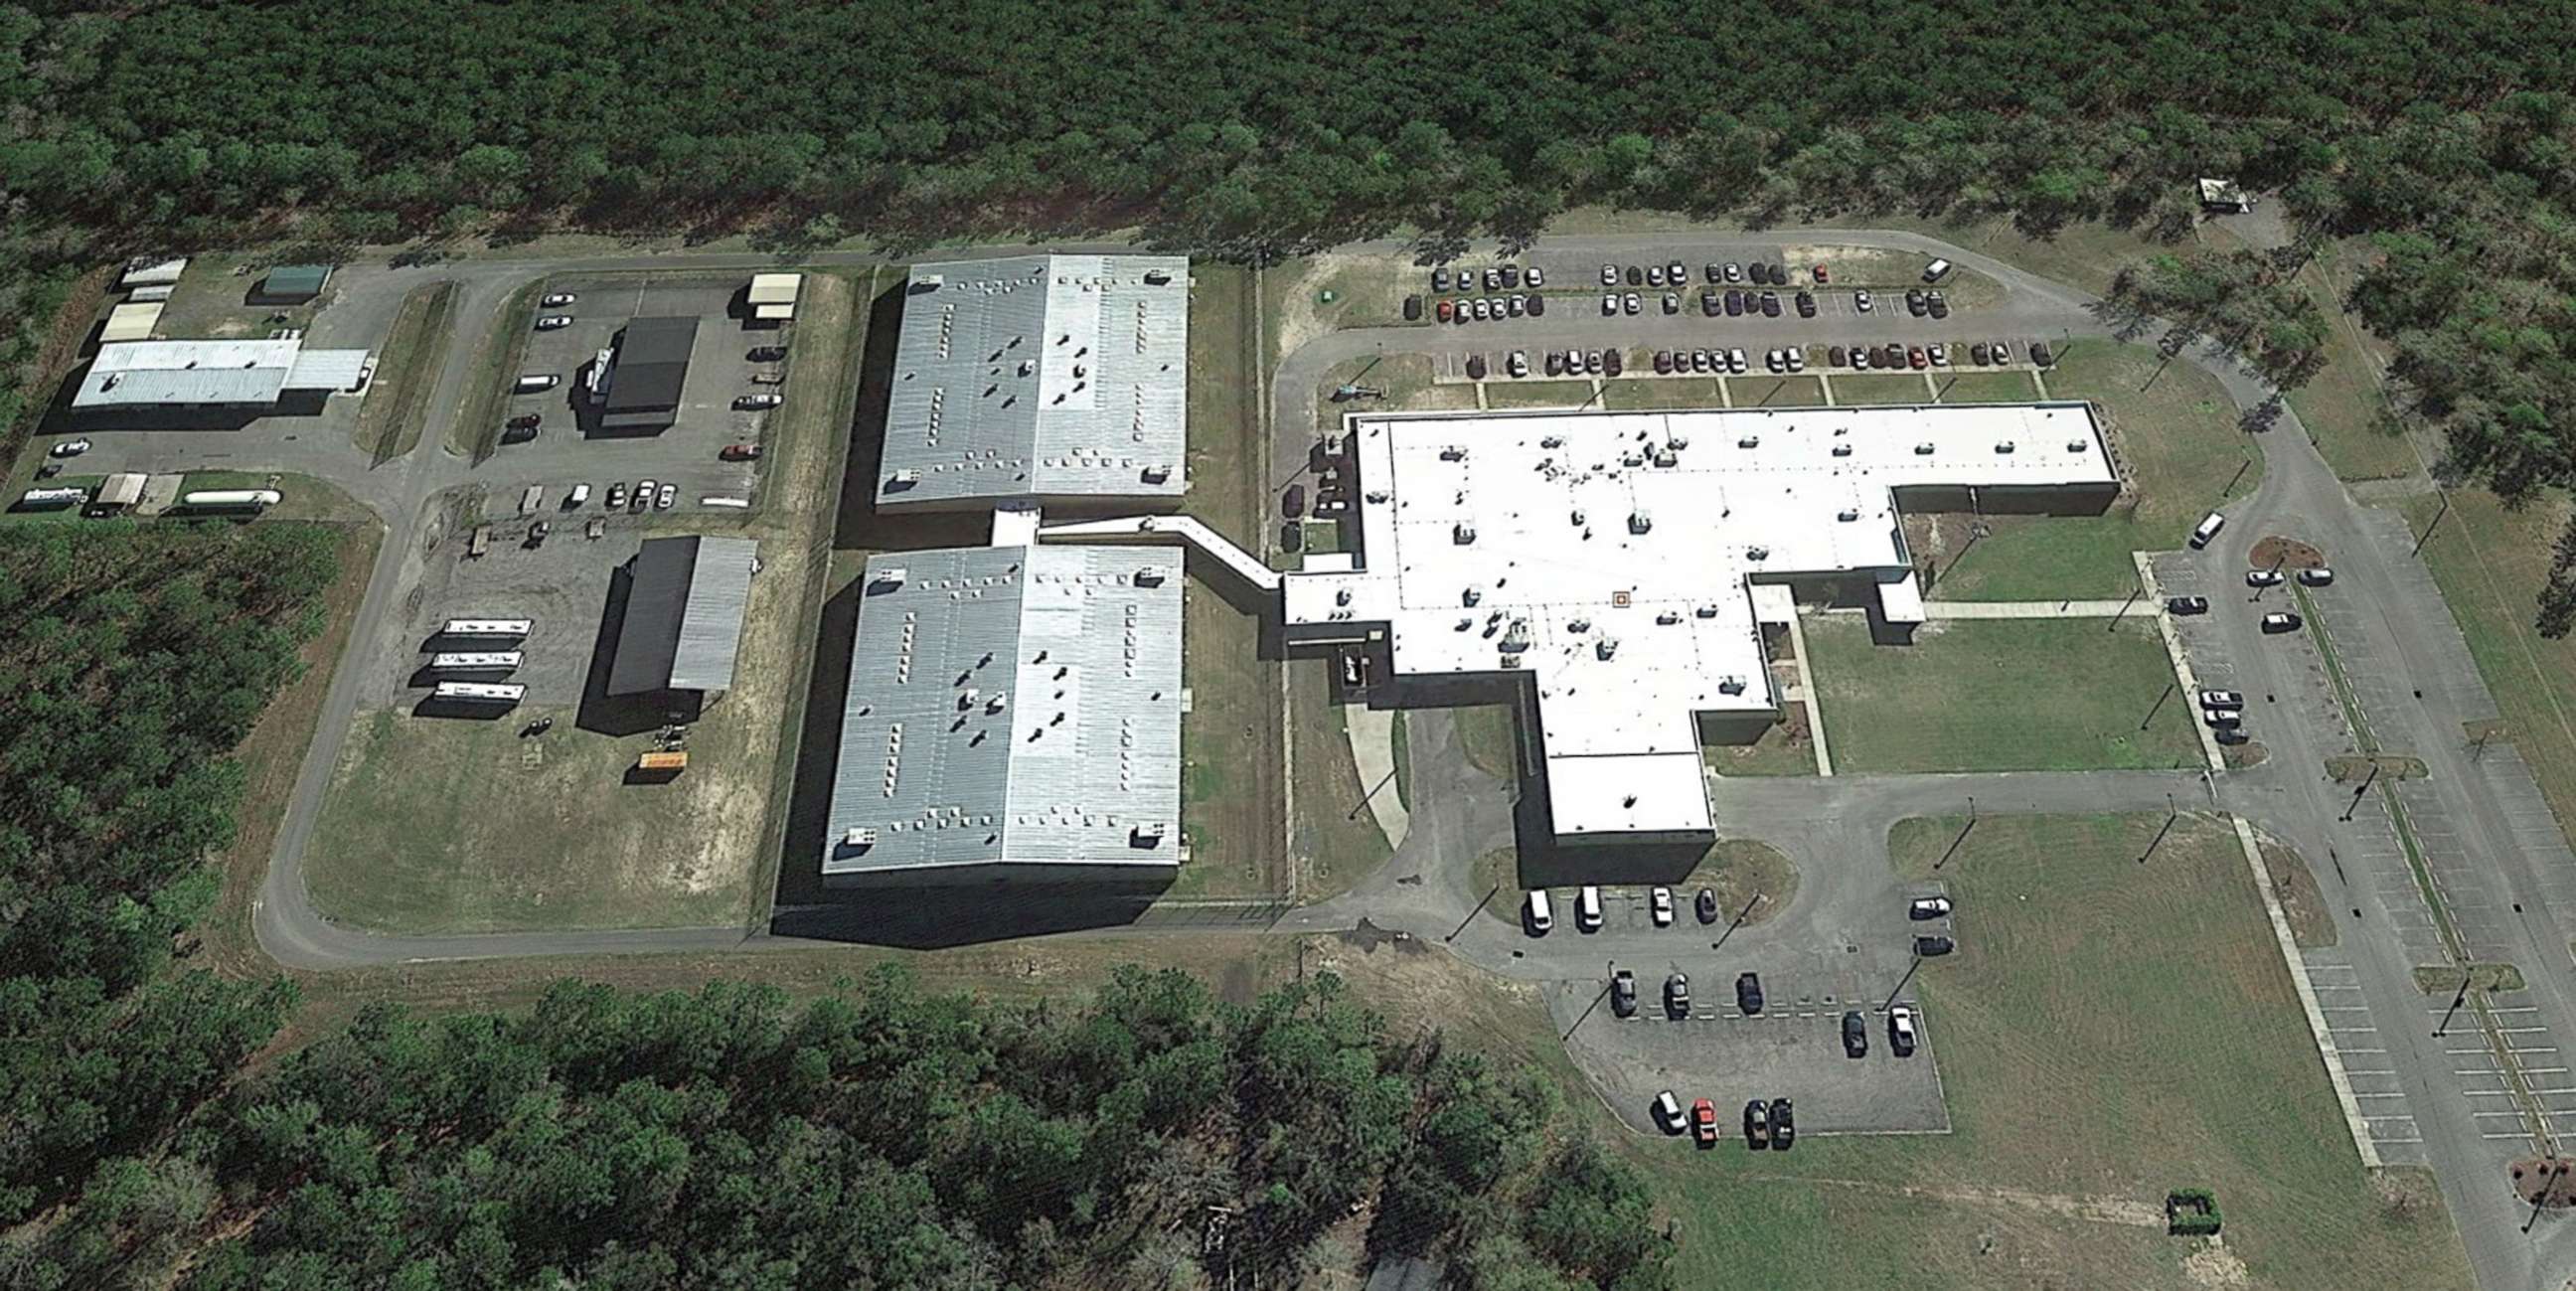 PHOTO: An undated aerial view shows the Baker County Detention Center in Macclenny, Fla.